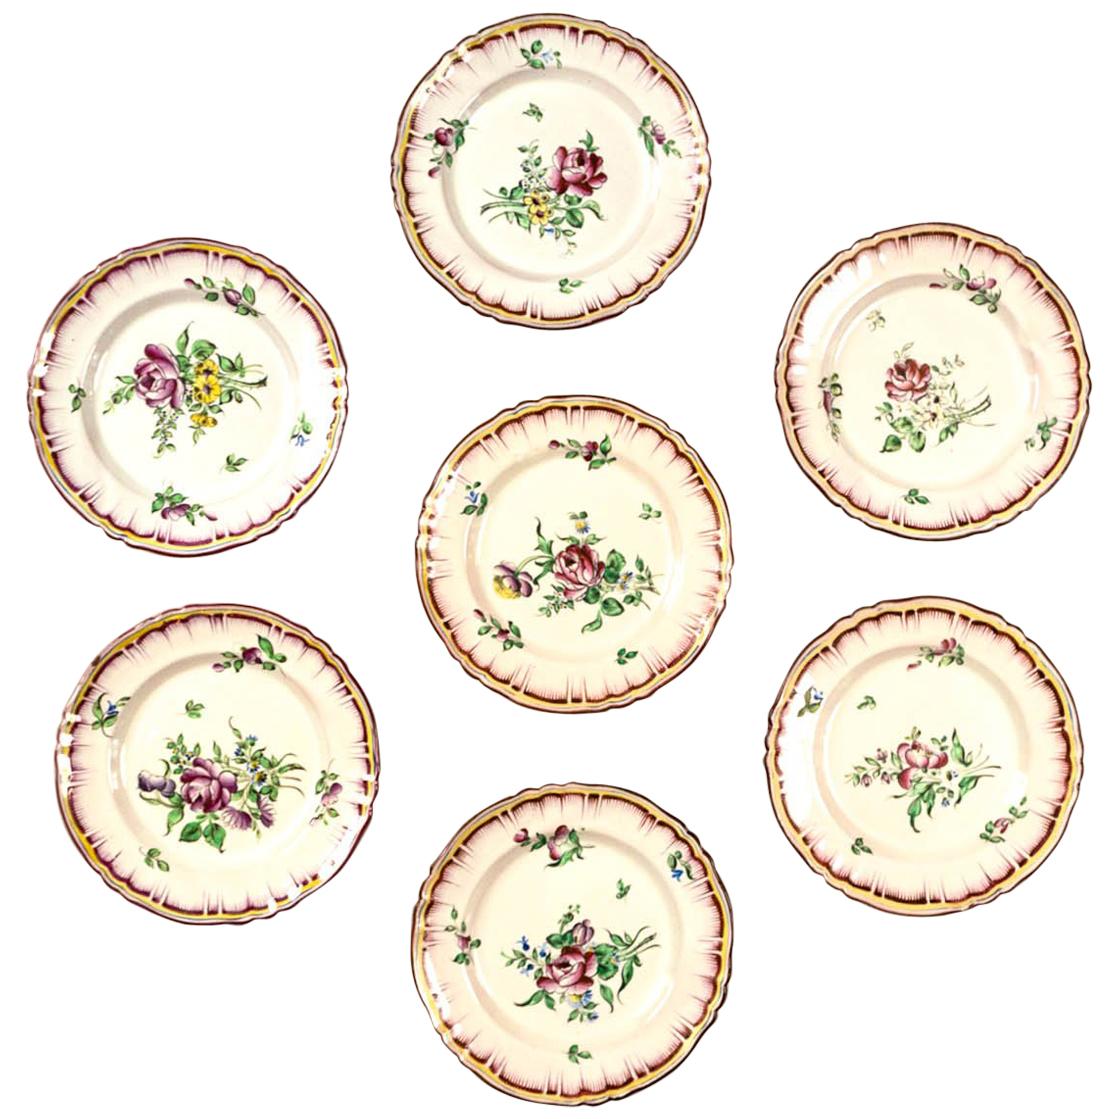 Set of 7 French Faience Plates, Late 19th Century